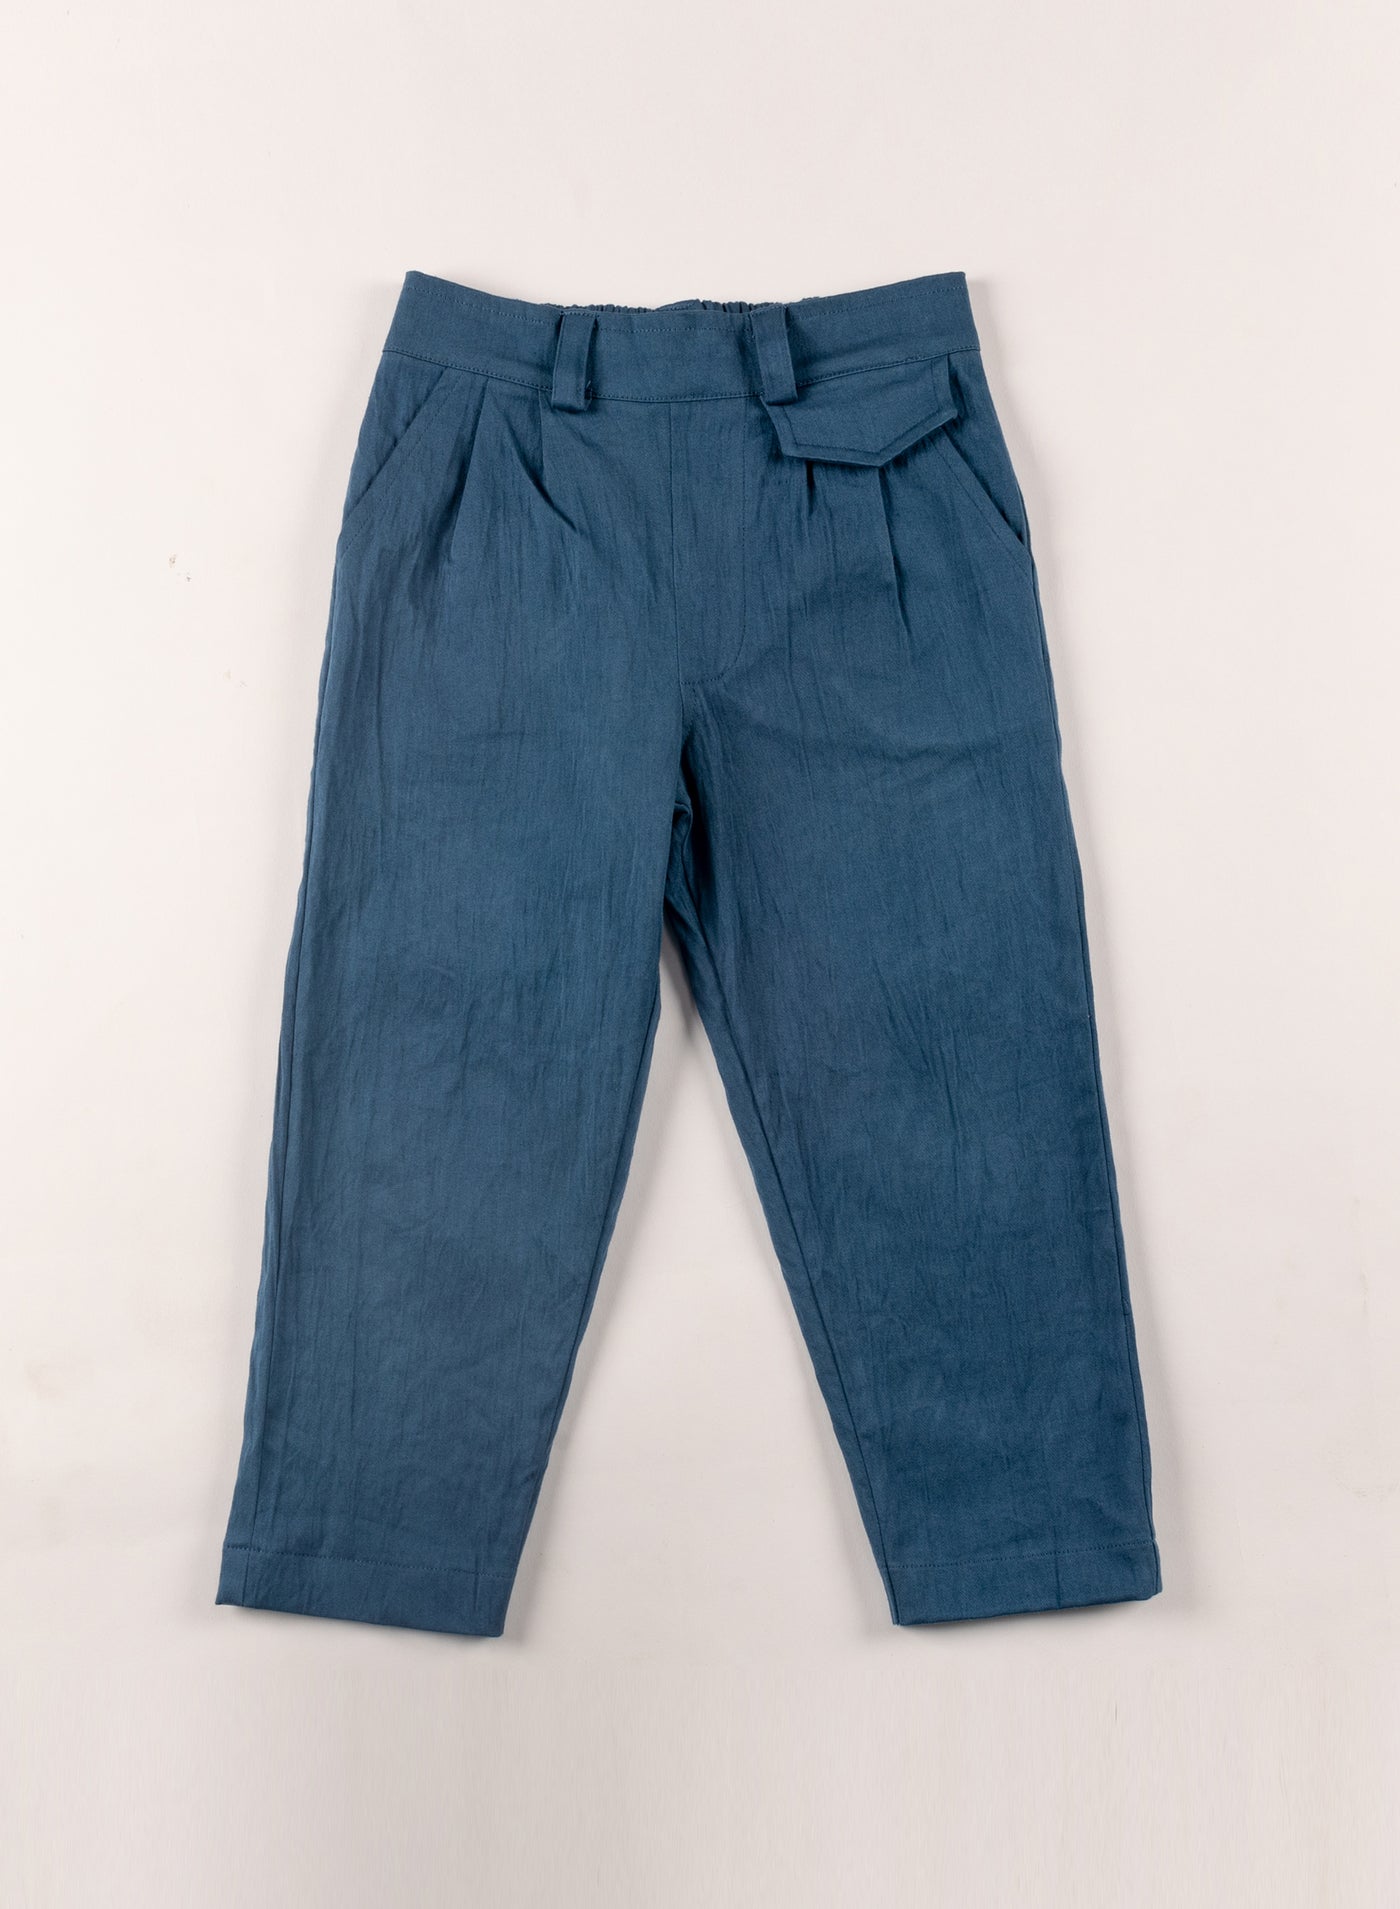 Darcy Pants - From Elfin House